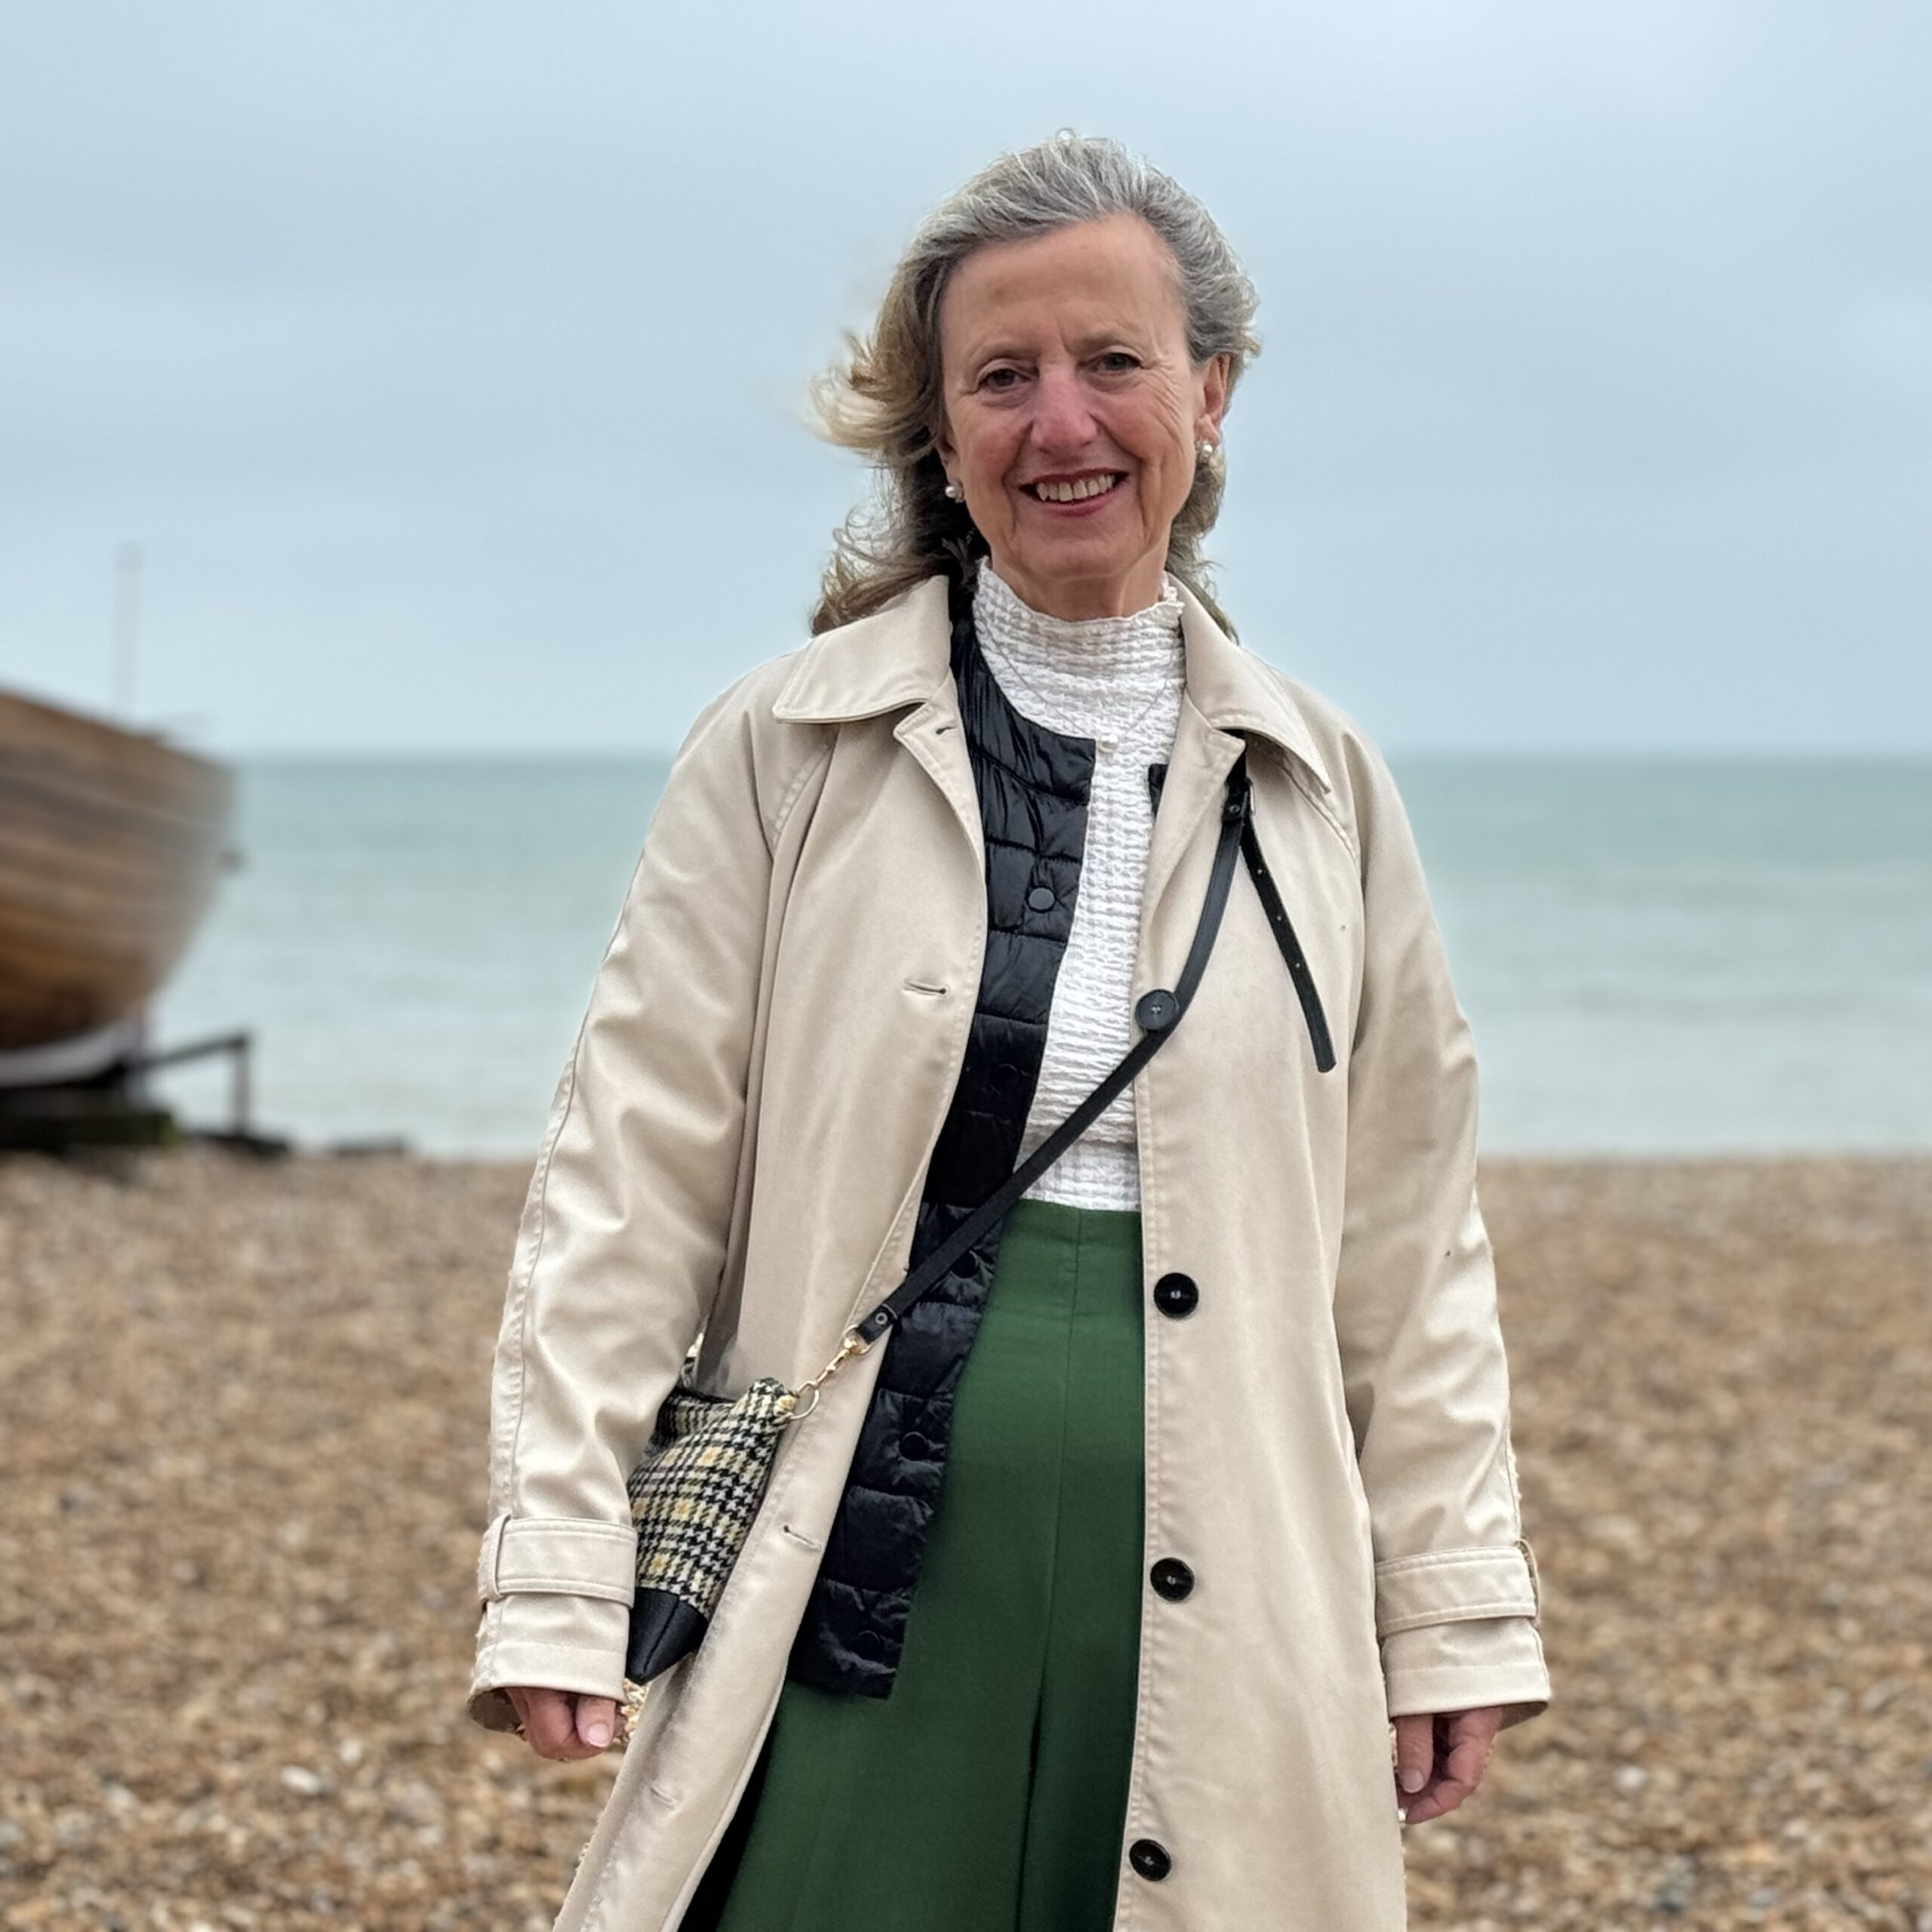 Natalie cameron ward on the beach in Deal